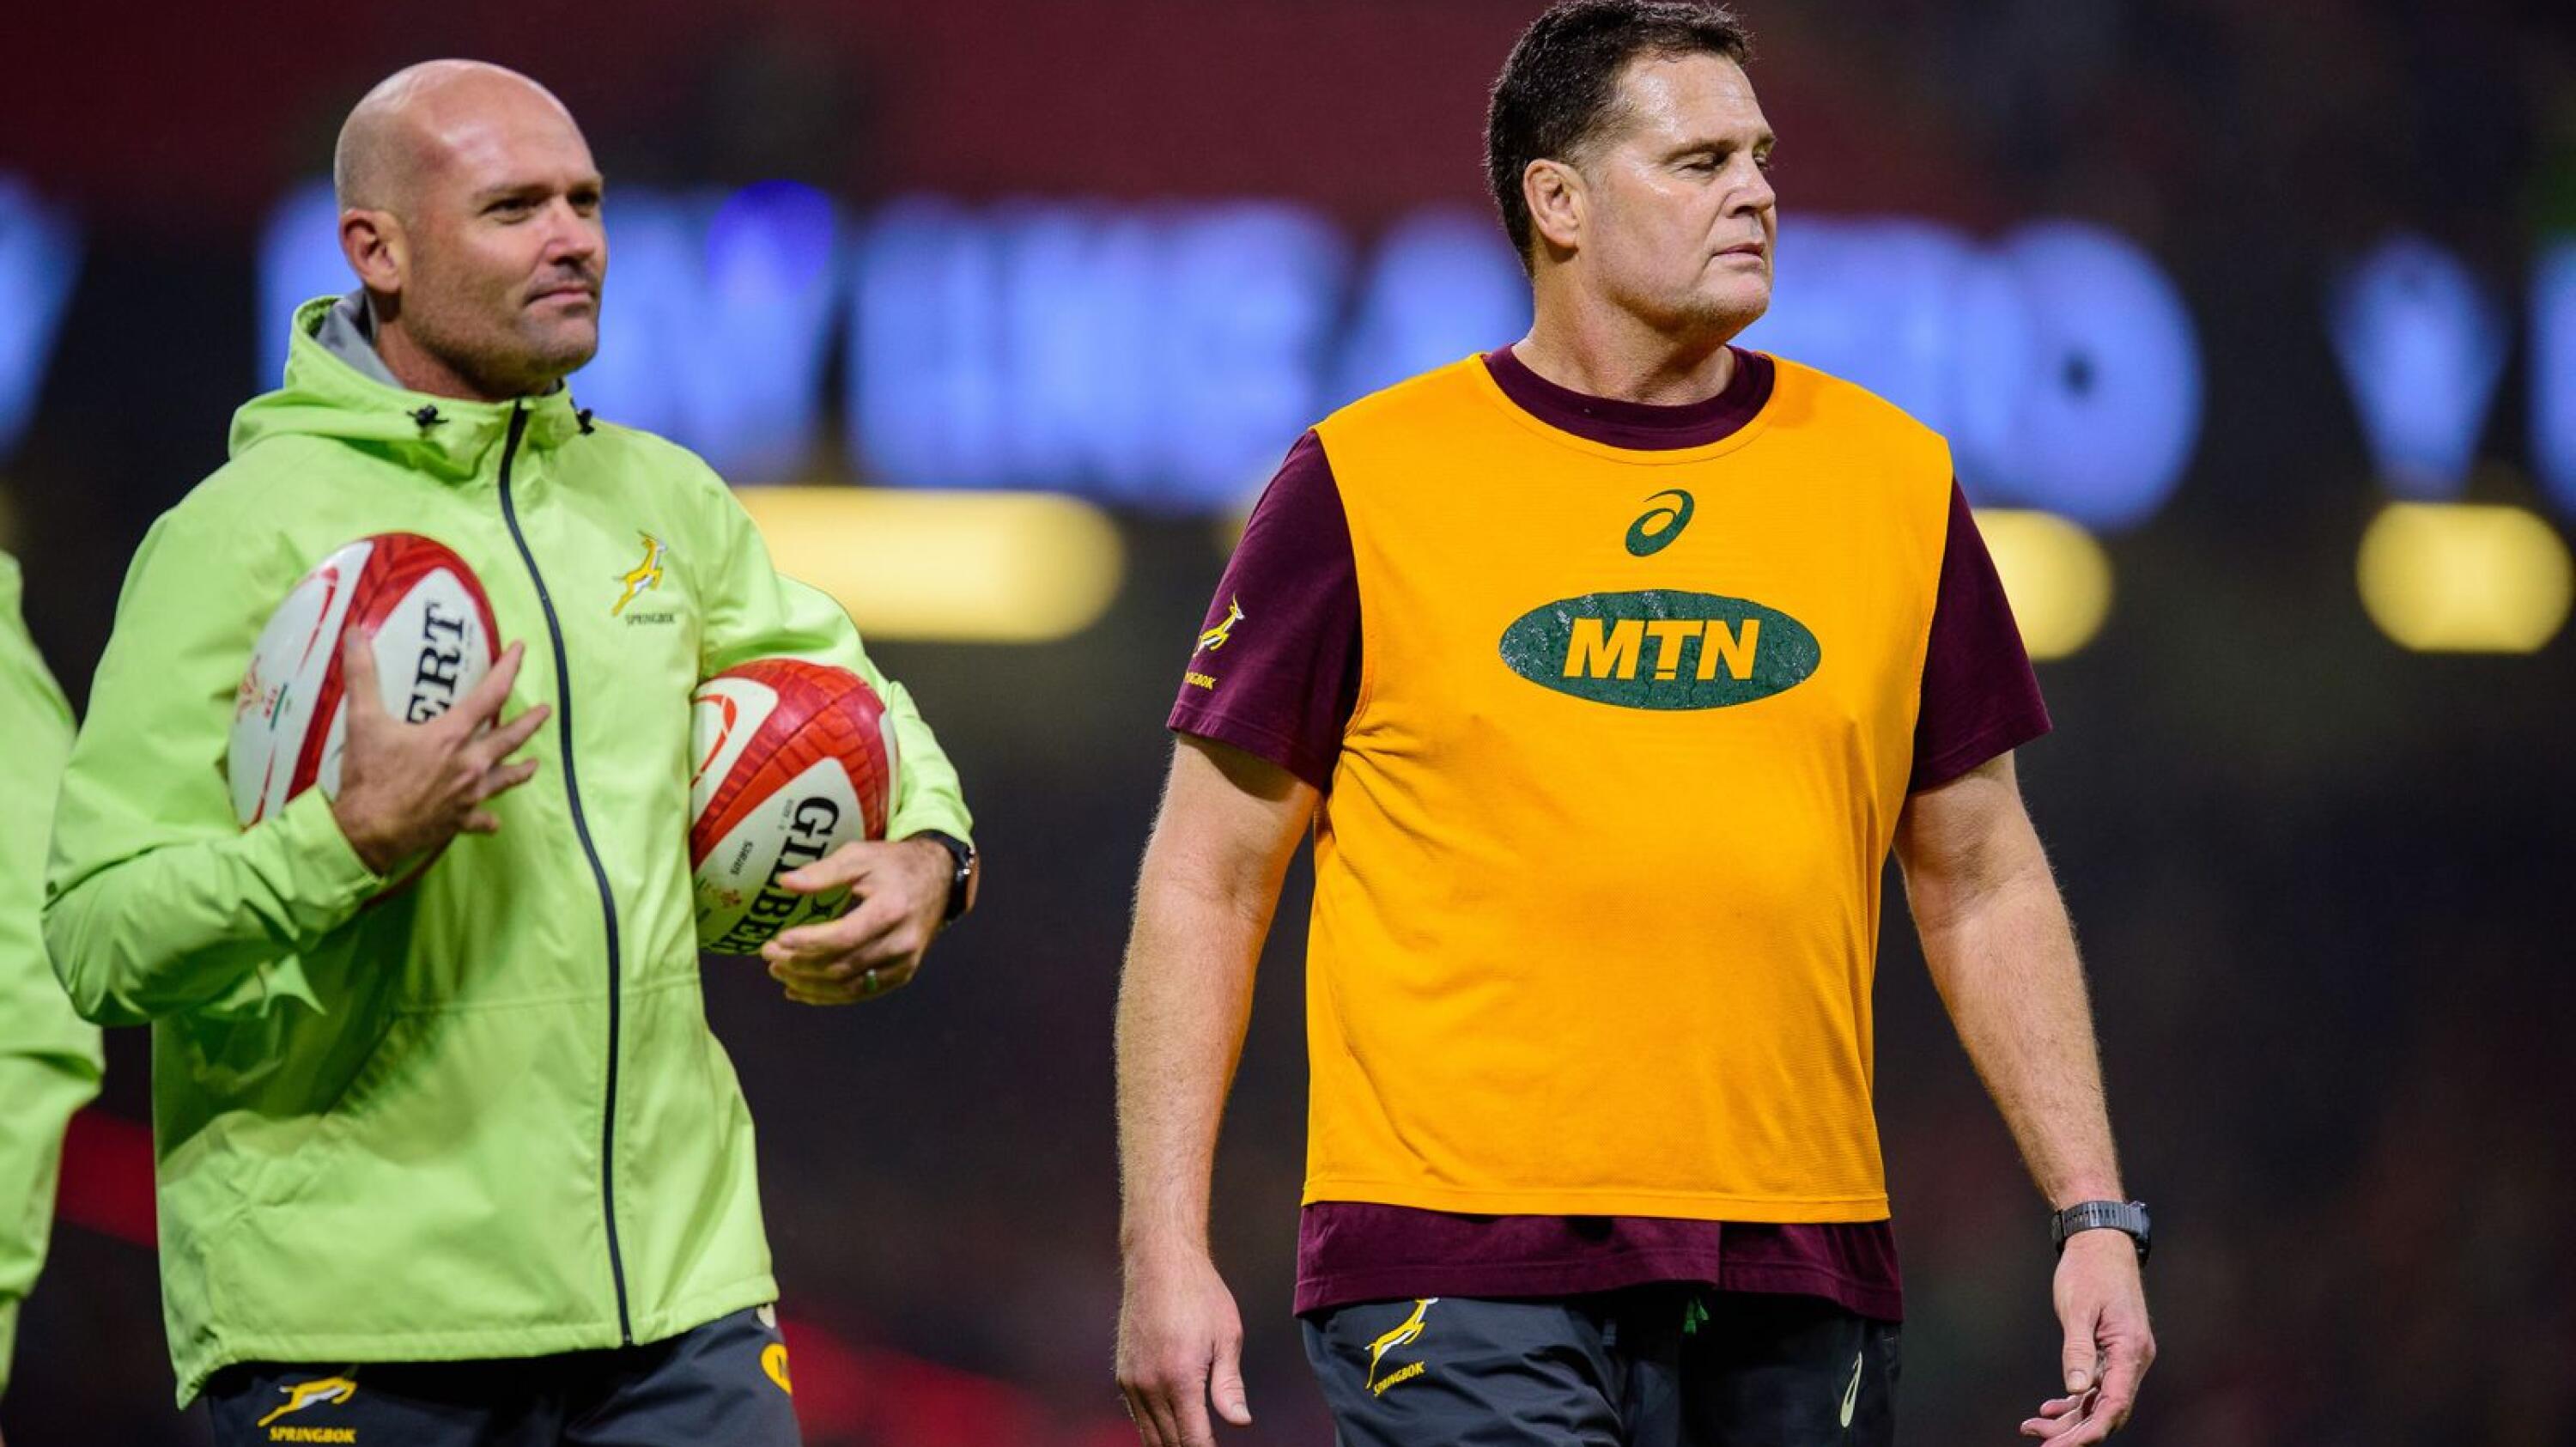 Springboks’ head coach Jacques Nienaber and South Africa director of rugby Rassie Erasmus during the team’s warm-up ahead of a Test match.